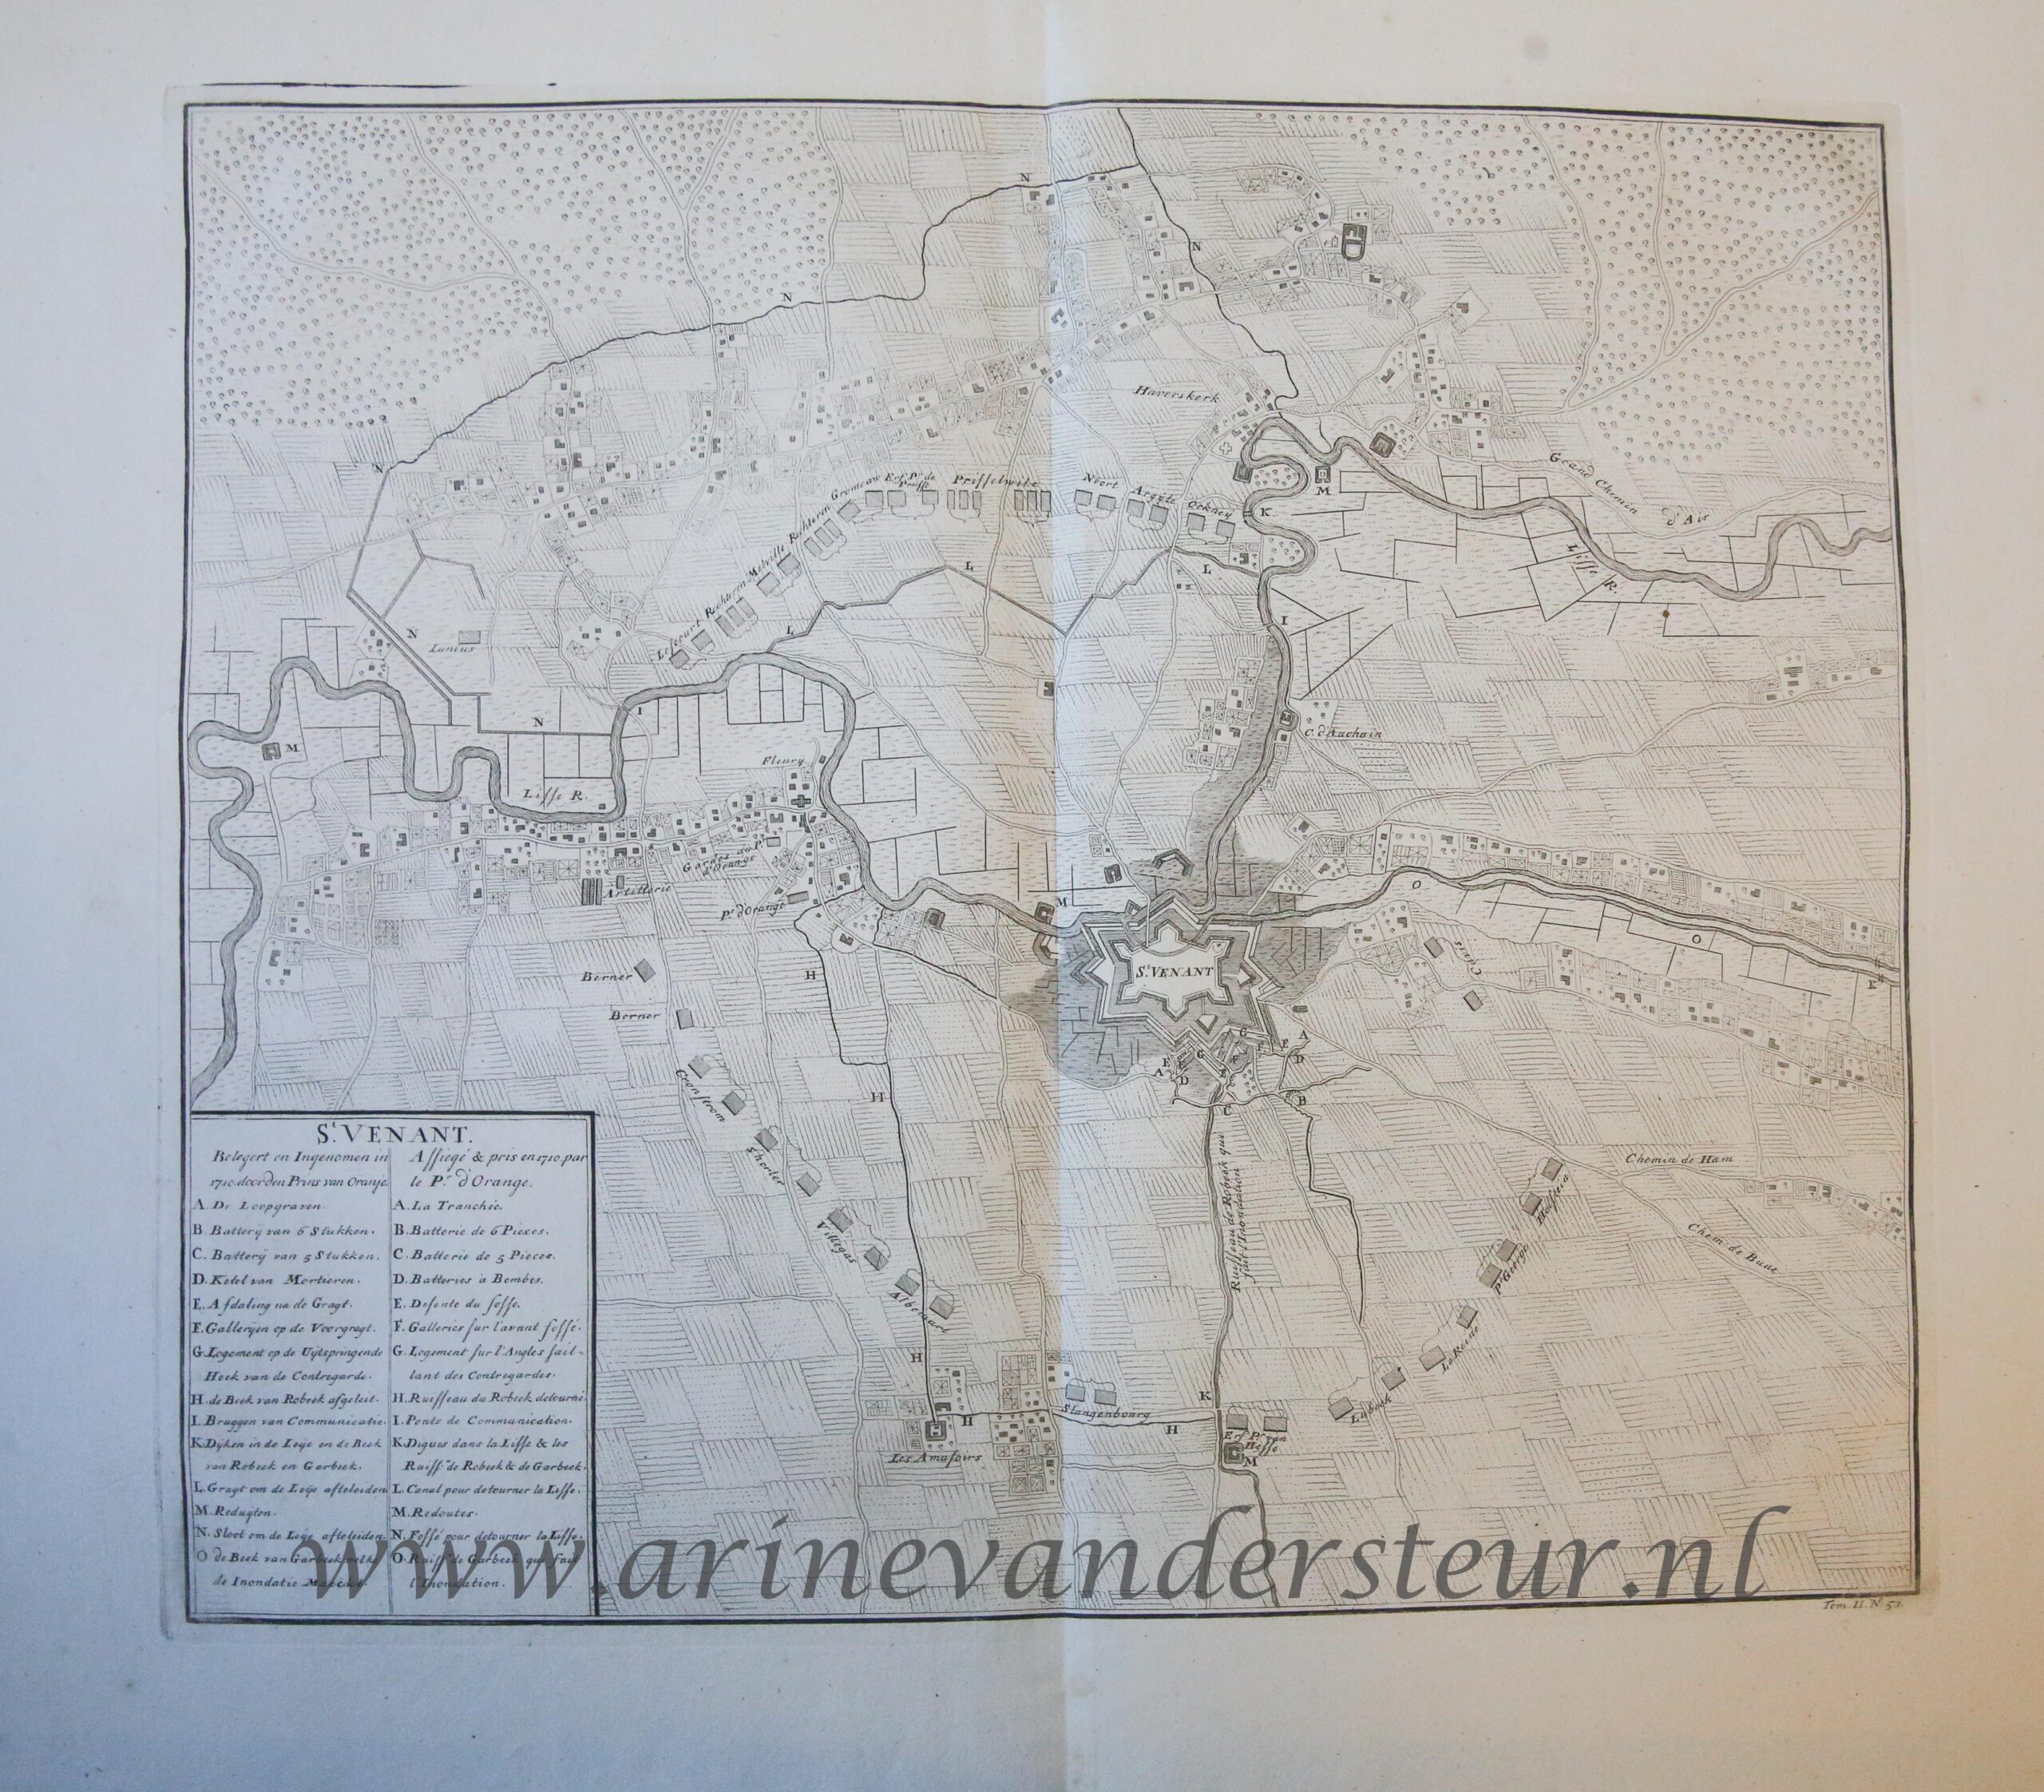 [Antique print, etching] Map of the siege of Saint-Venant in 1710 (Spanish Succession War), published 1729.